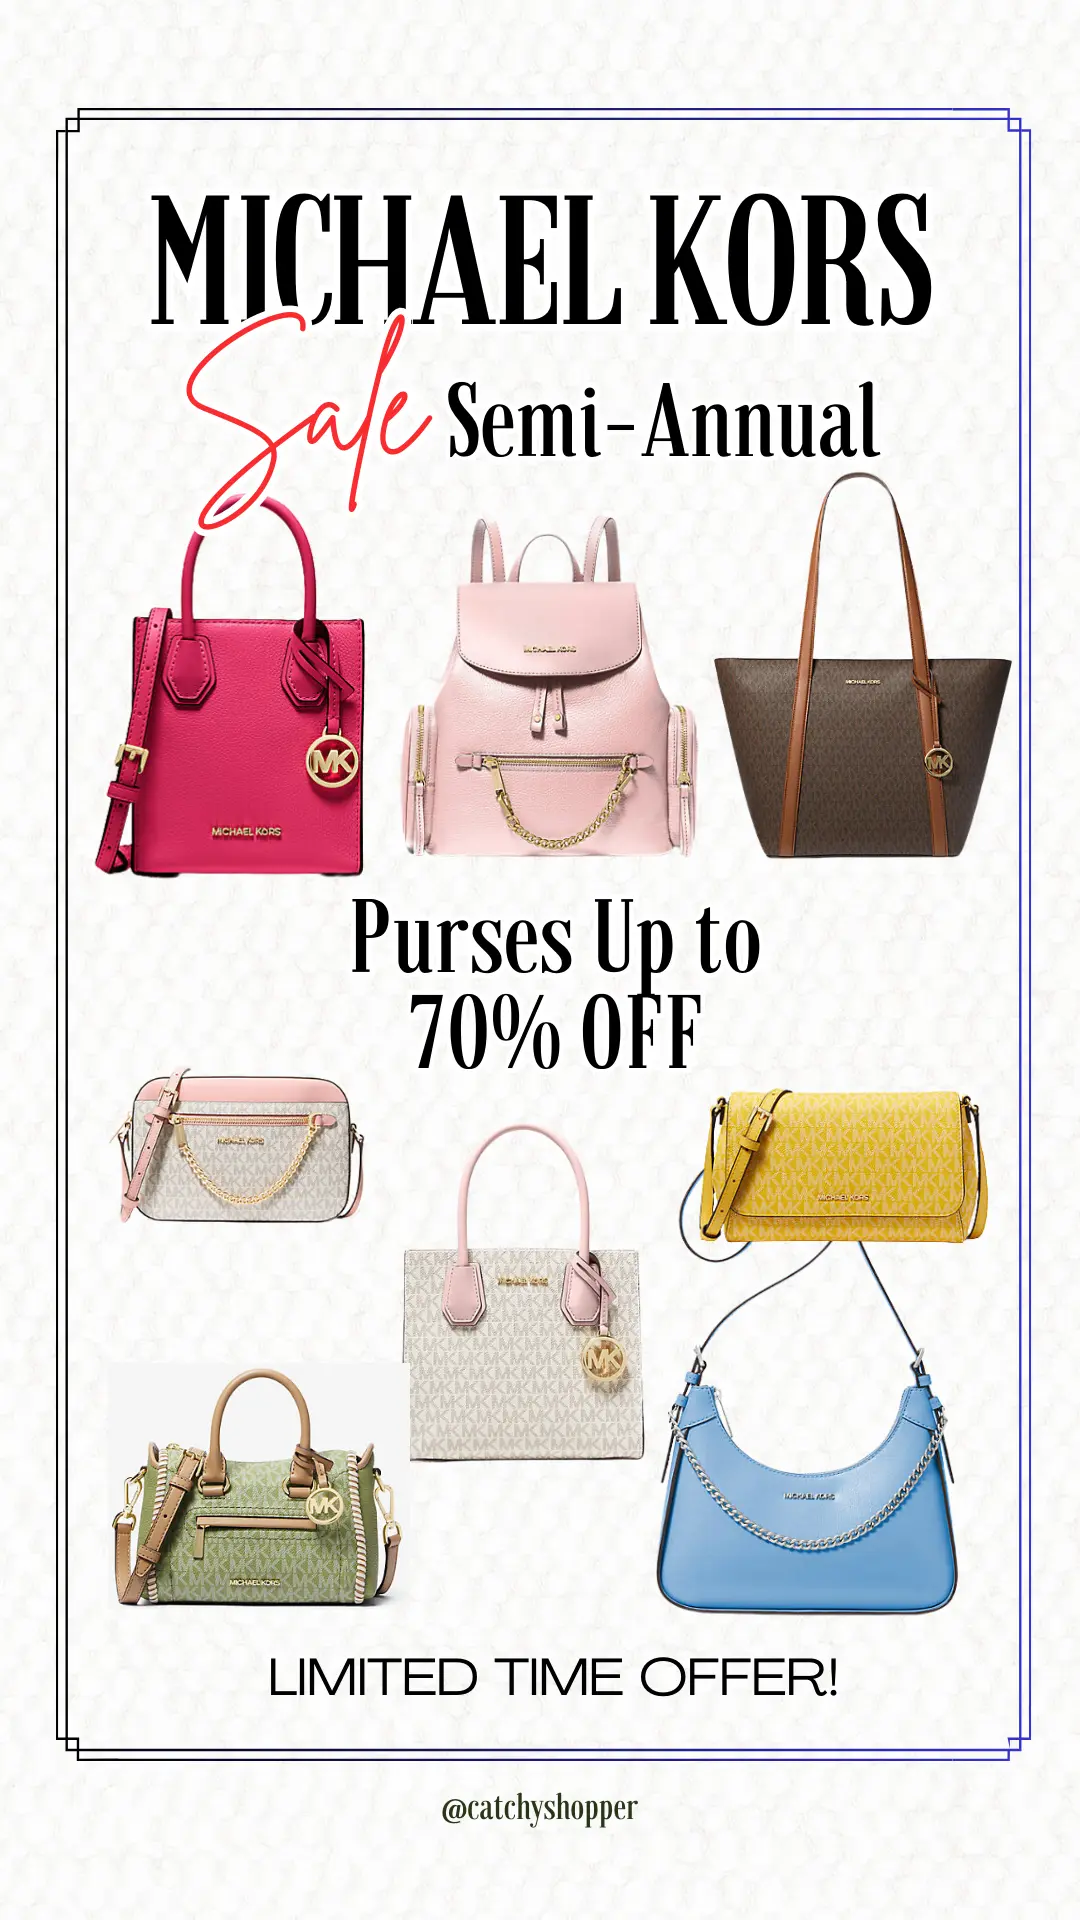 Don’t Miss Out: Michael Kors Purse Sale – Semi-Annual Discounts of Up to 70% Off!